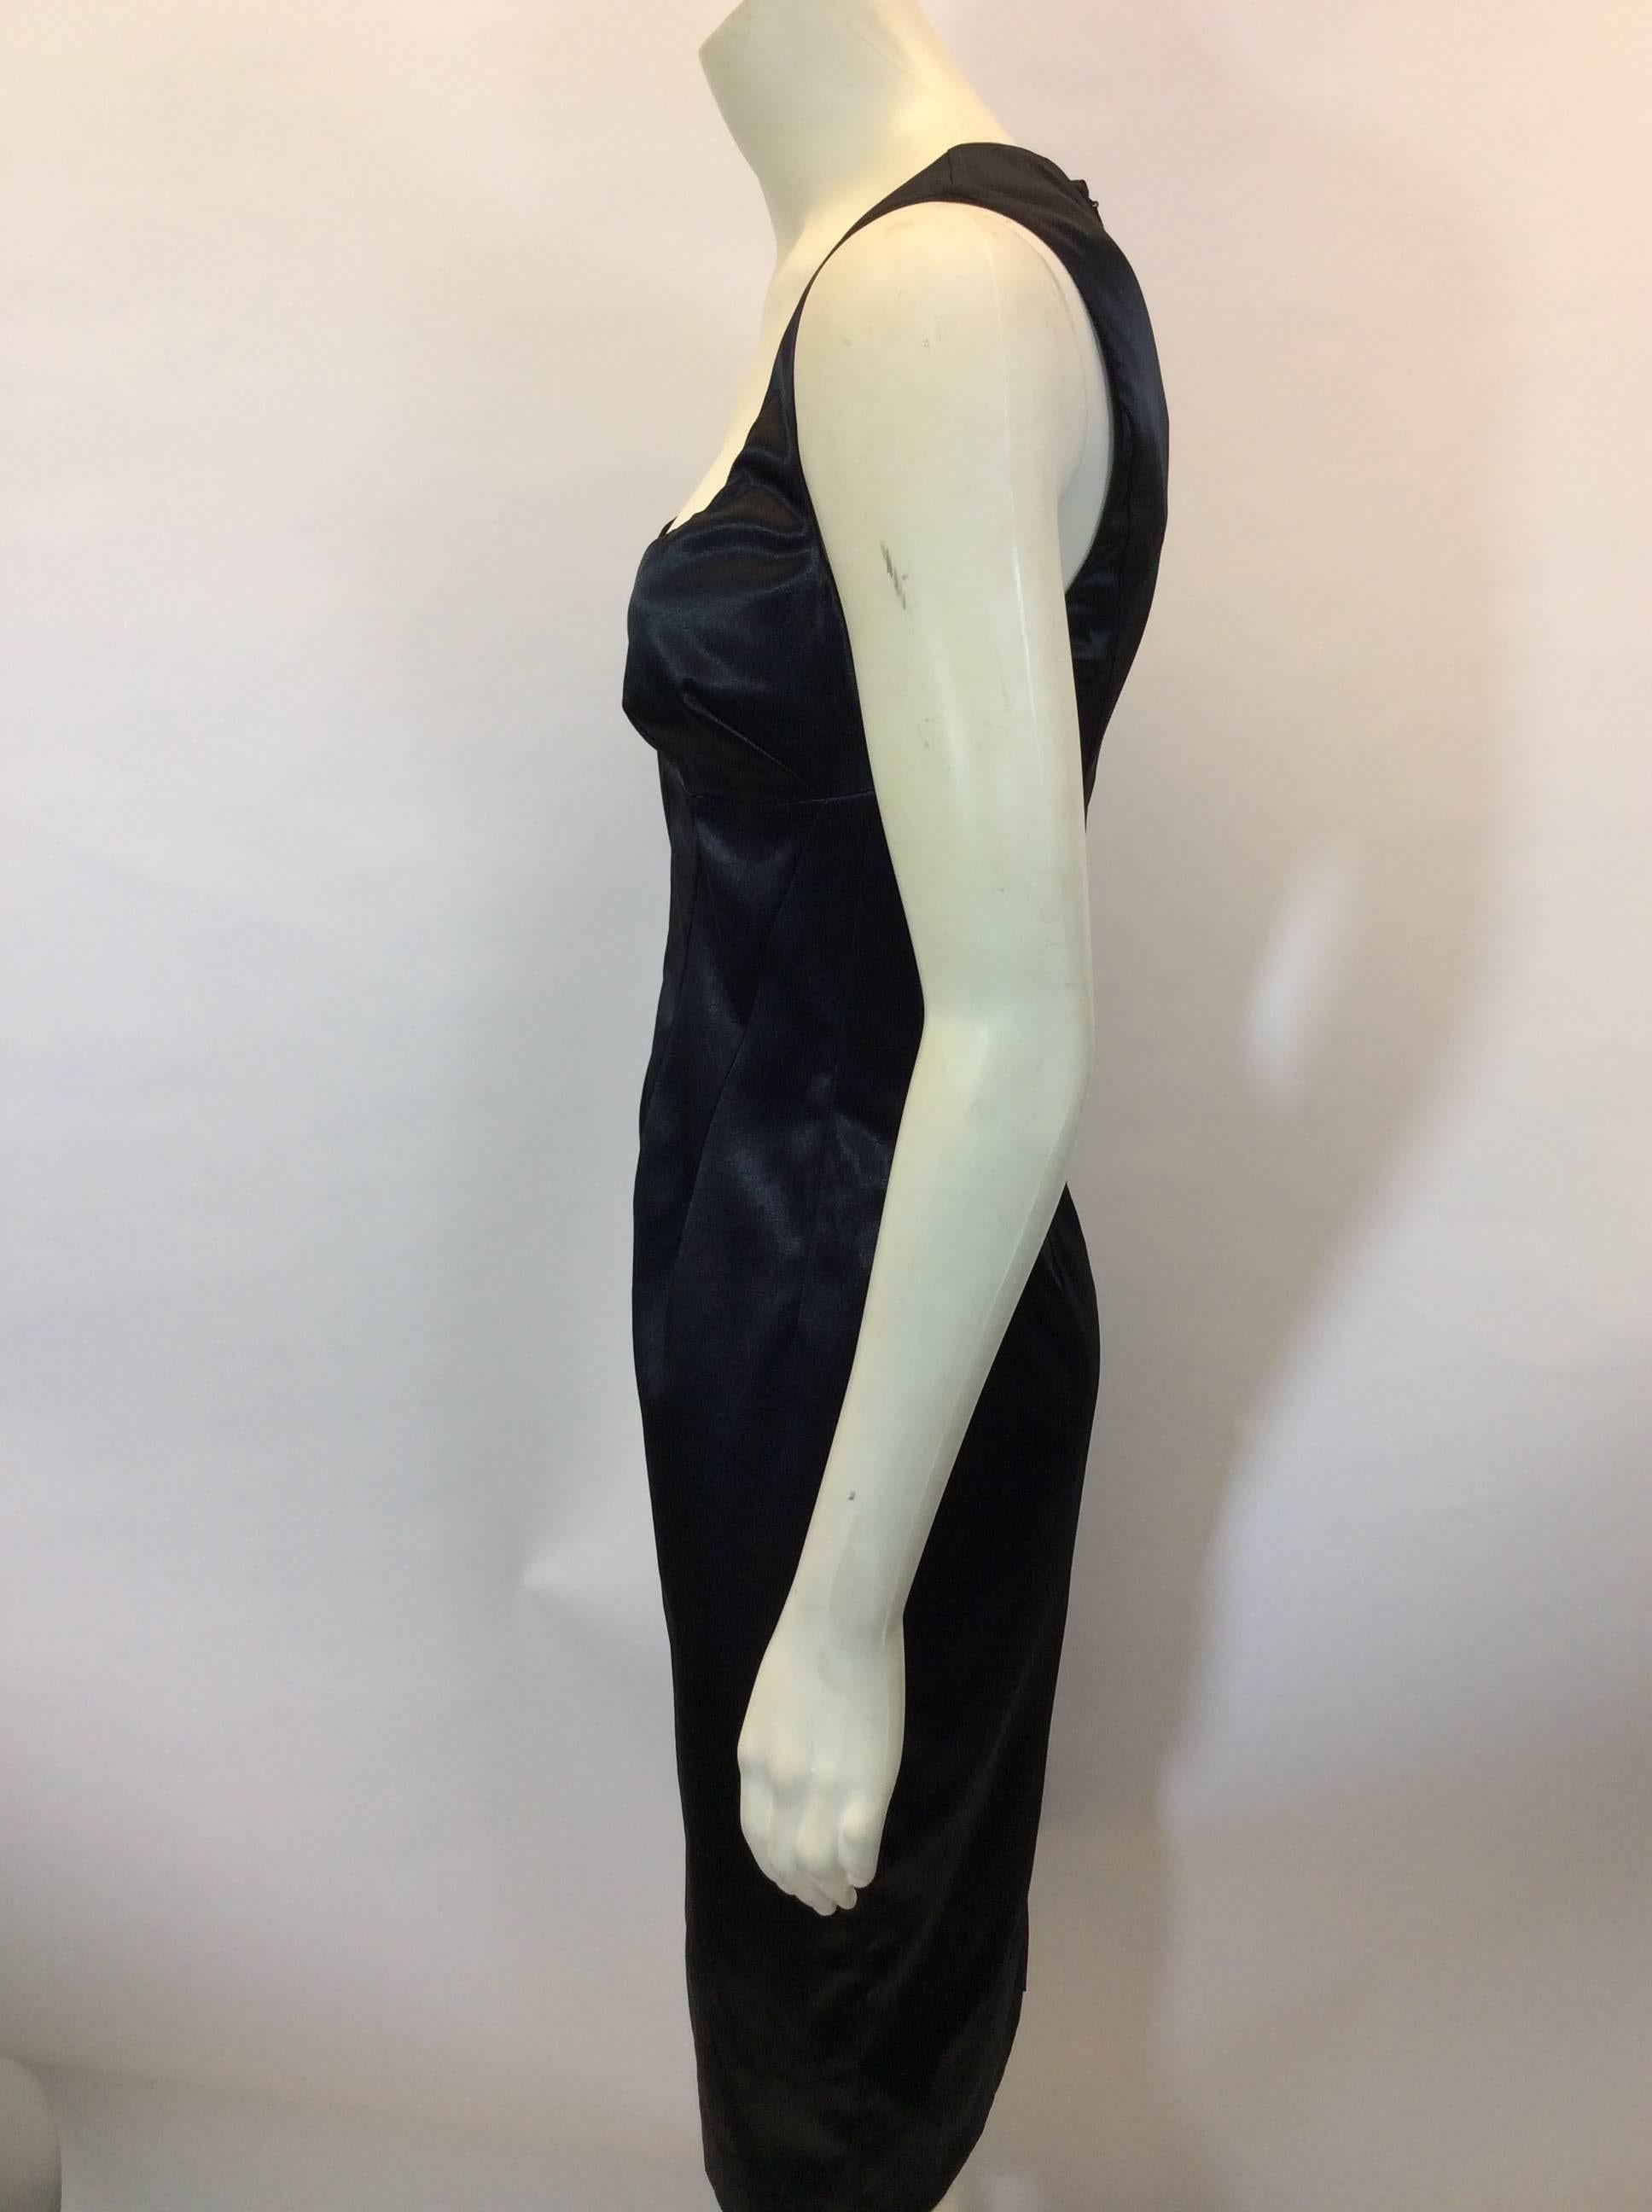 Dolce & Gabanna Black Bustier Detail Dress In New Condition For Sale In Narberth, PA